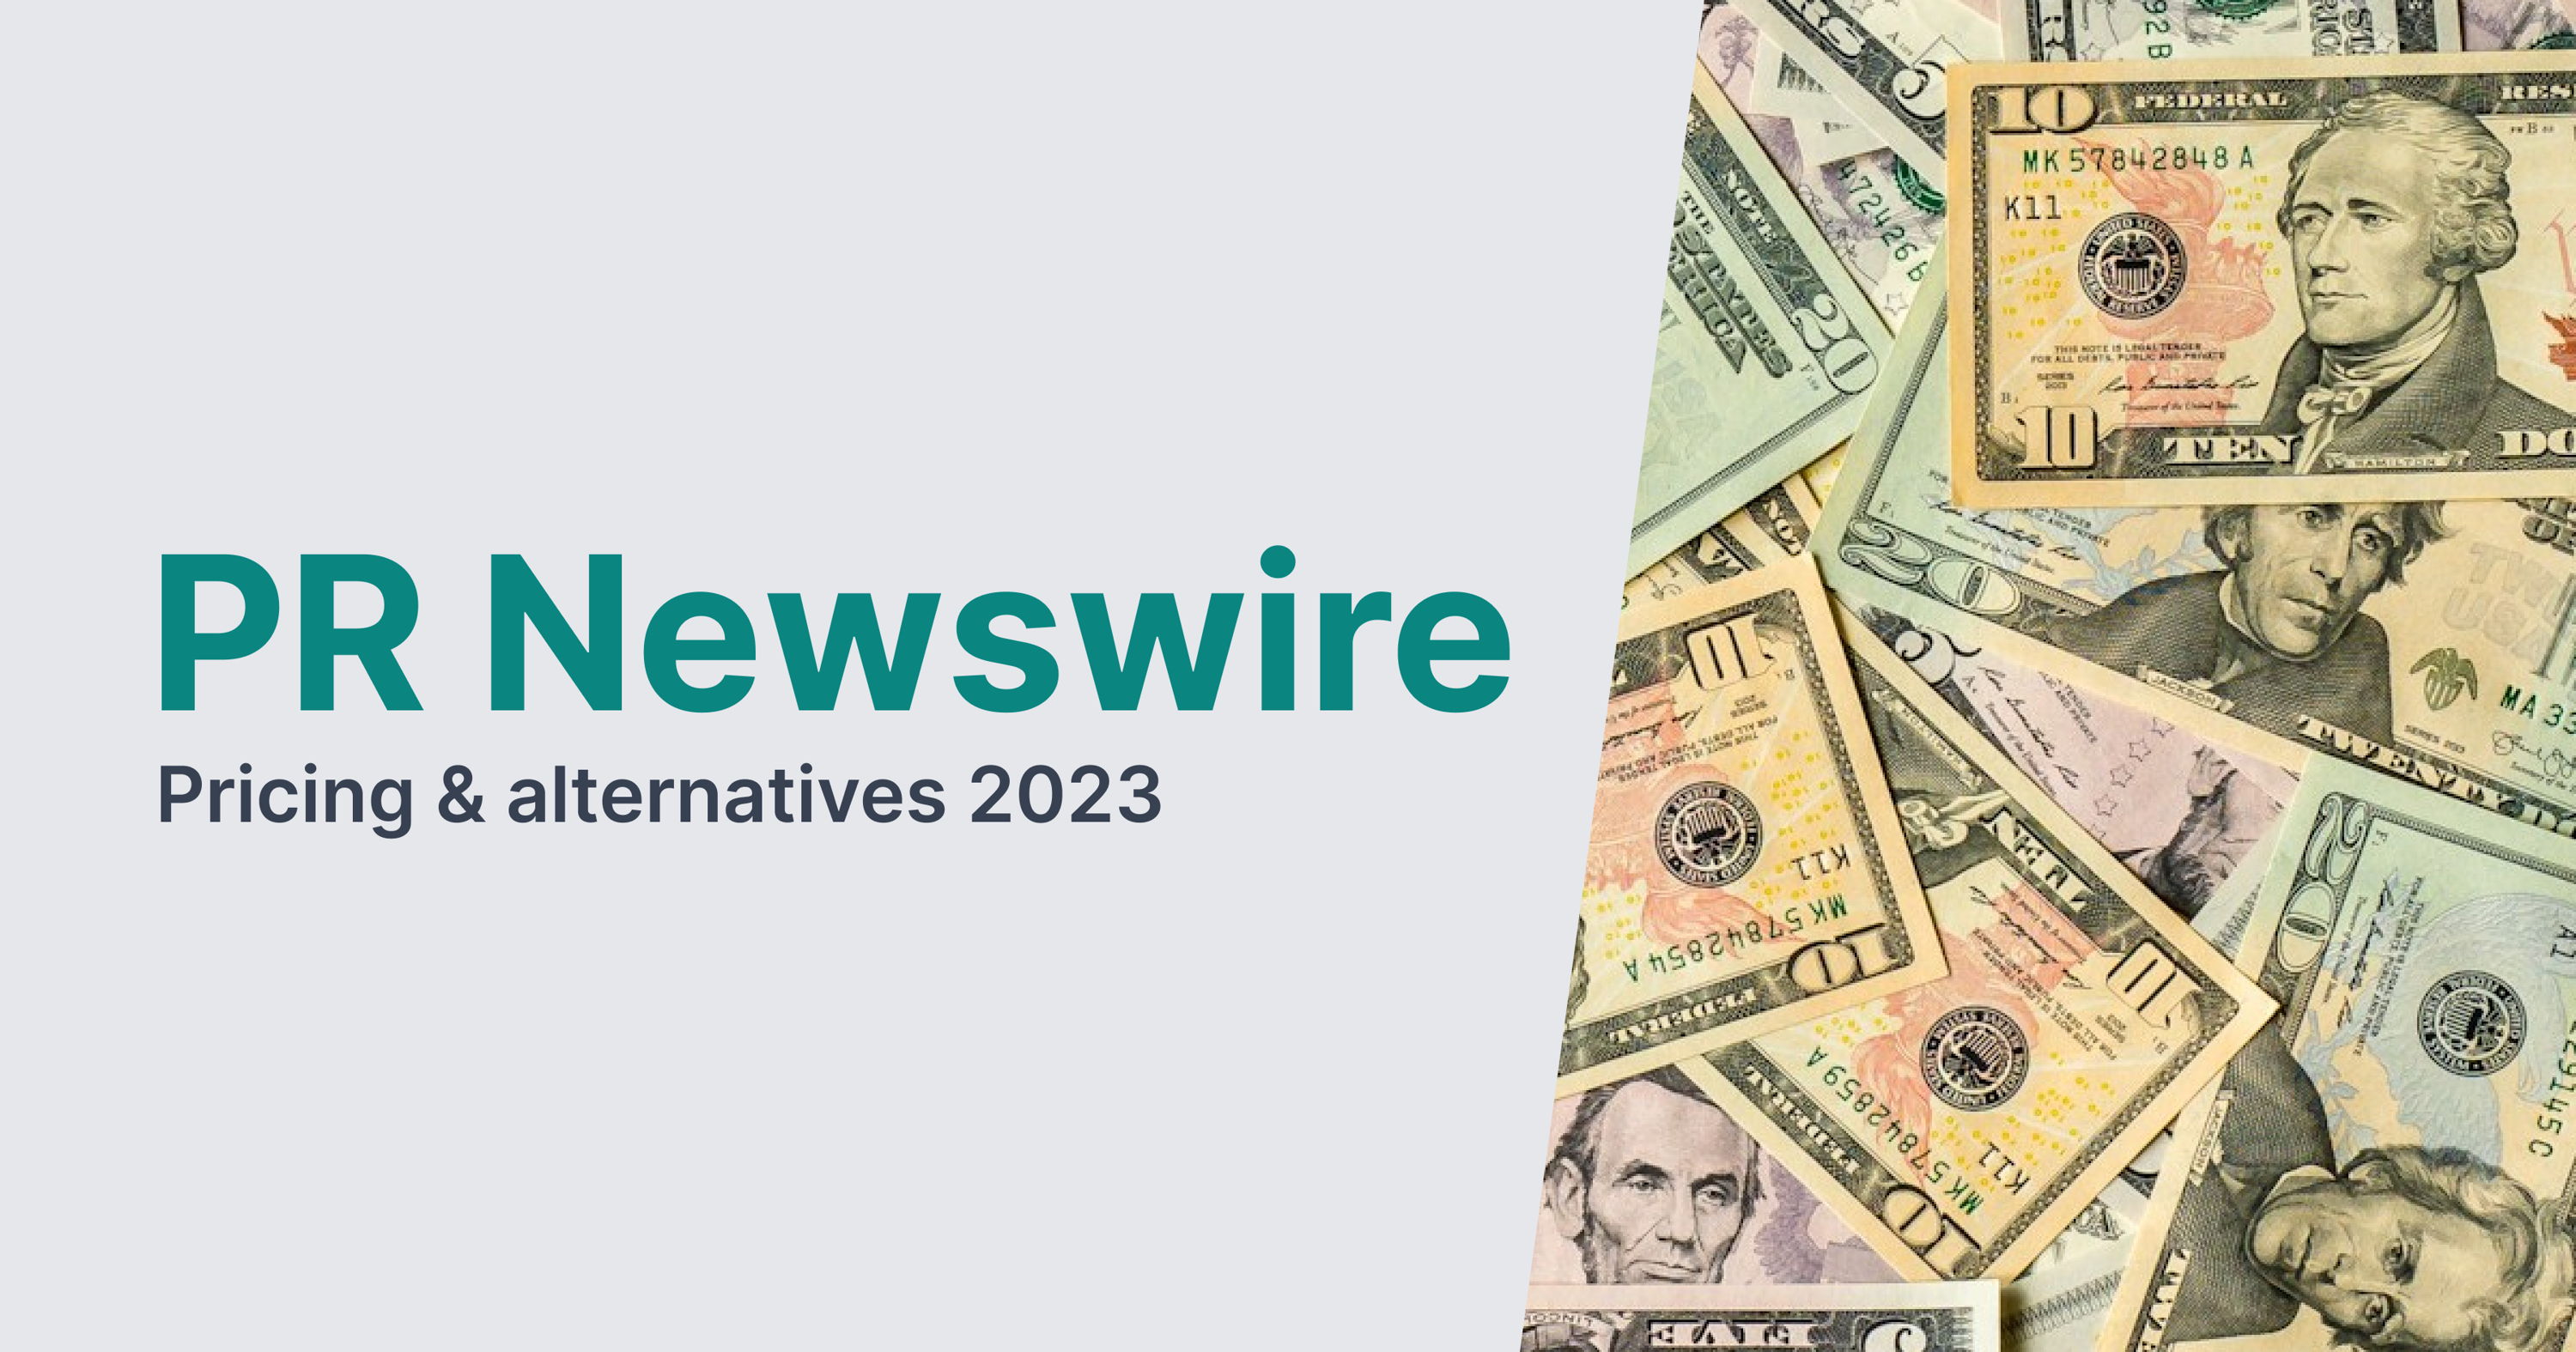 Academy: PR Newswire pricing 2023: How much does it cost to send a press release?